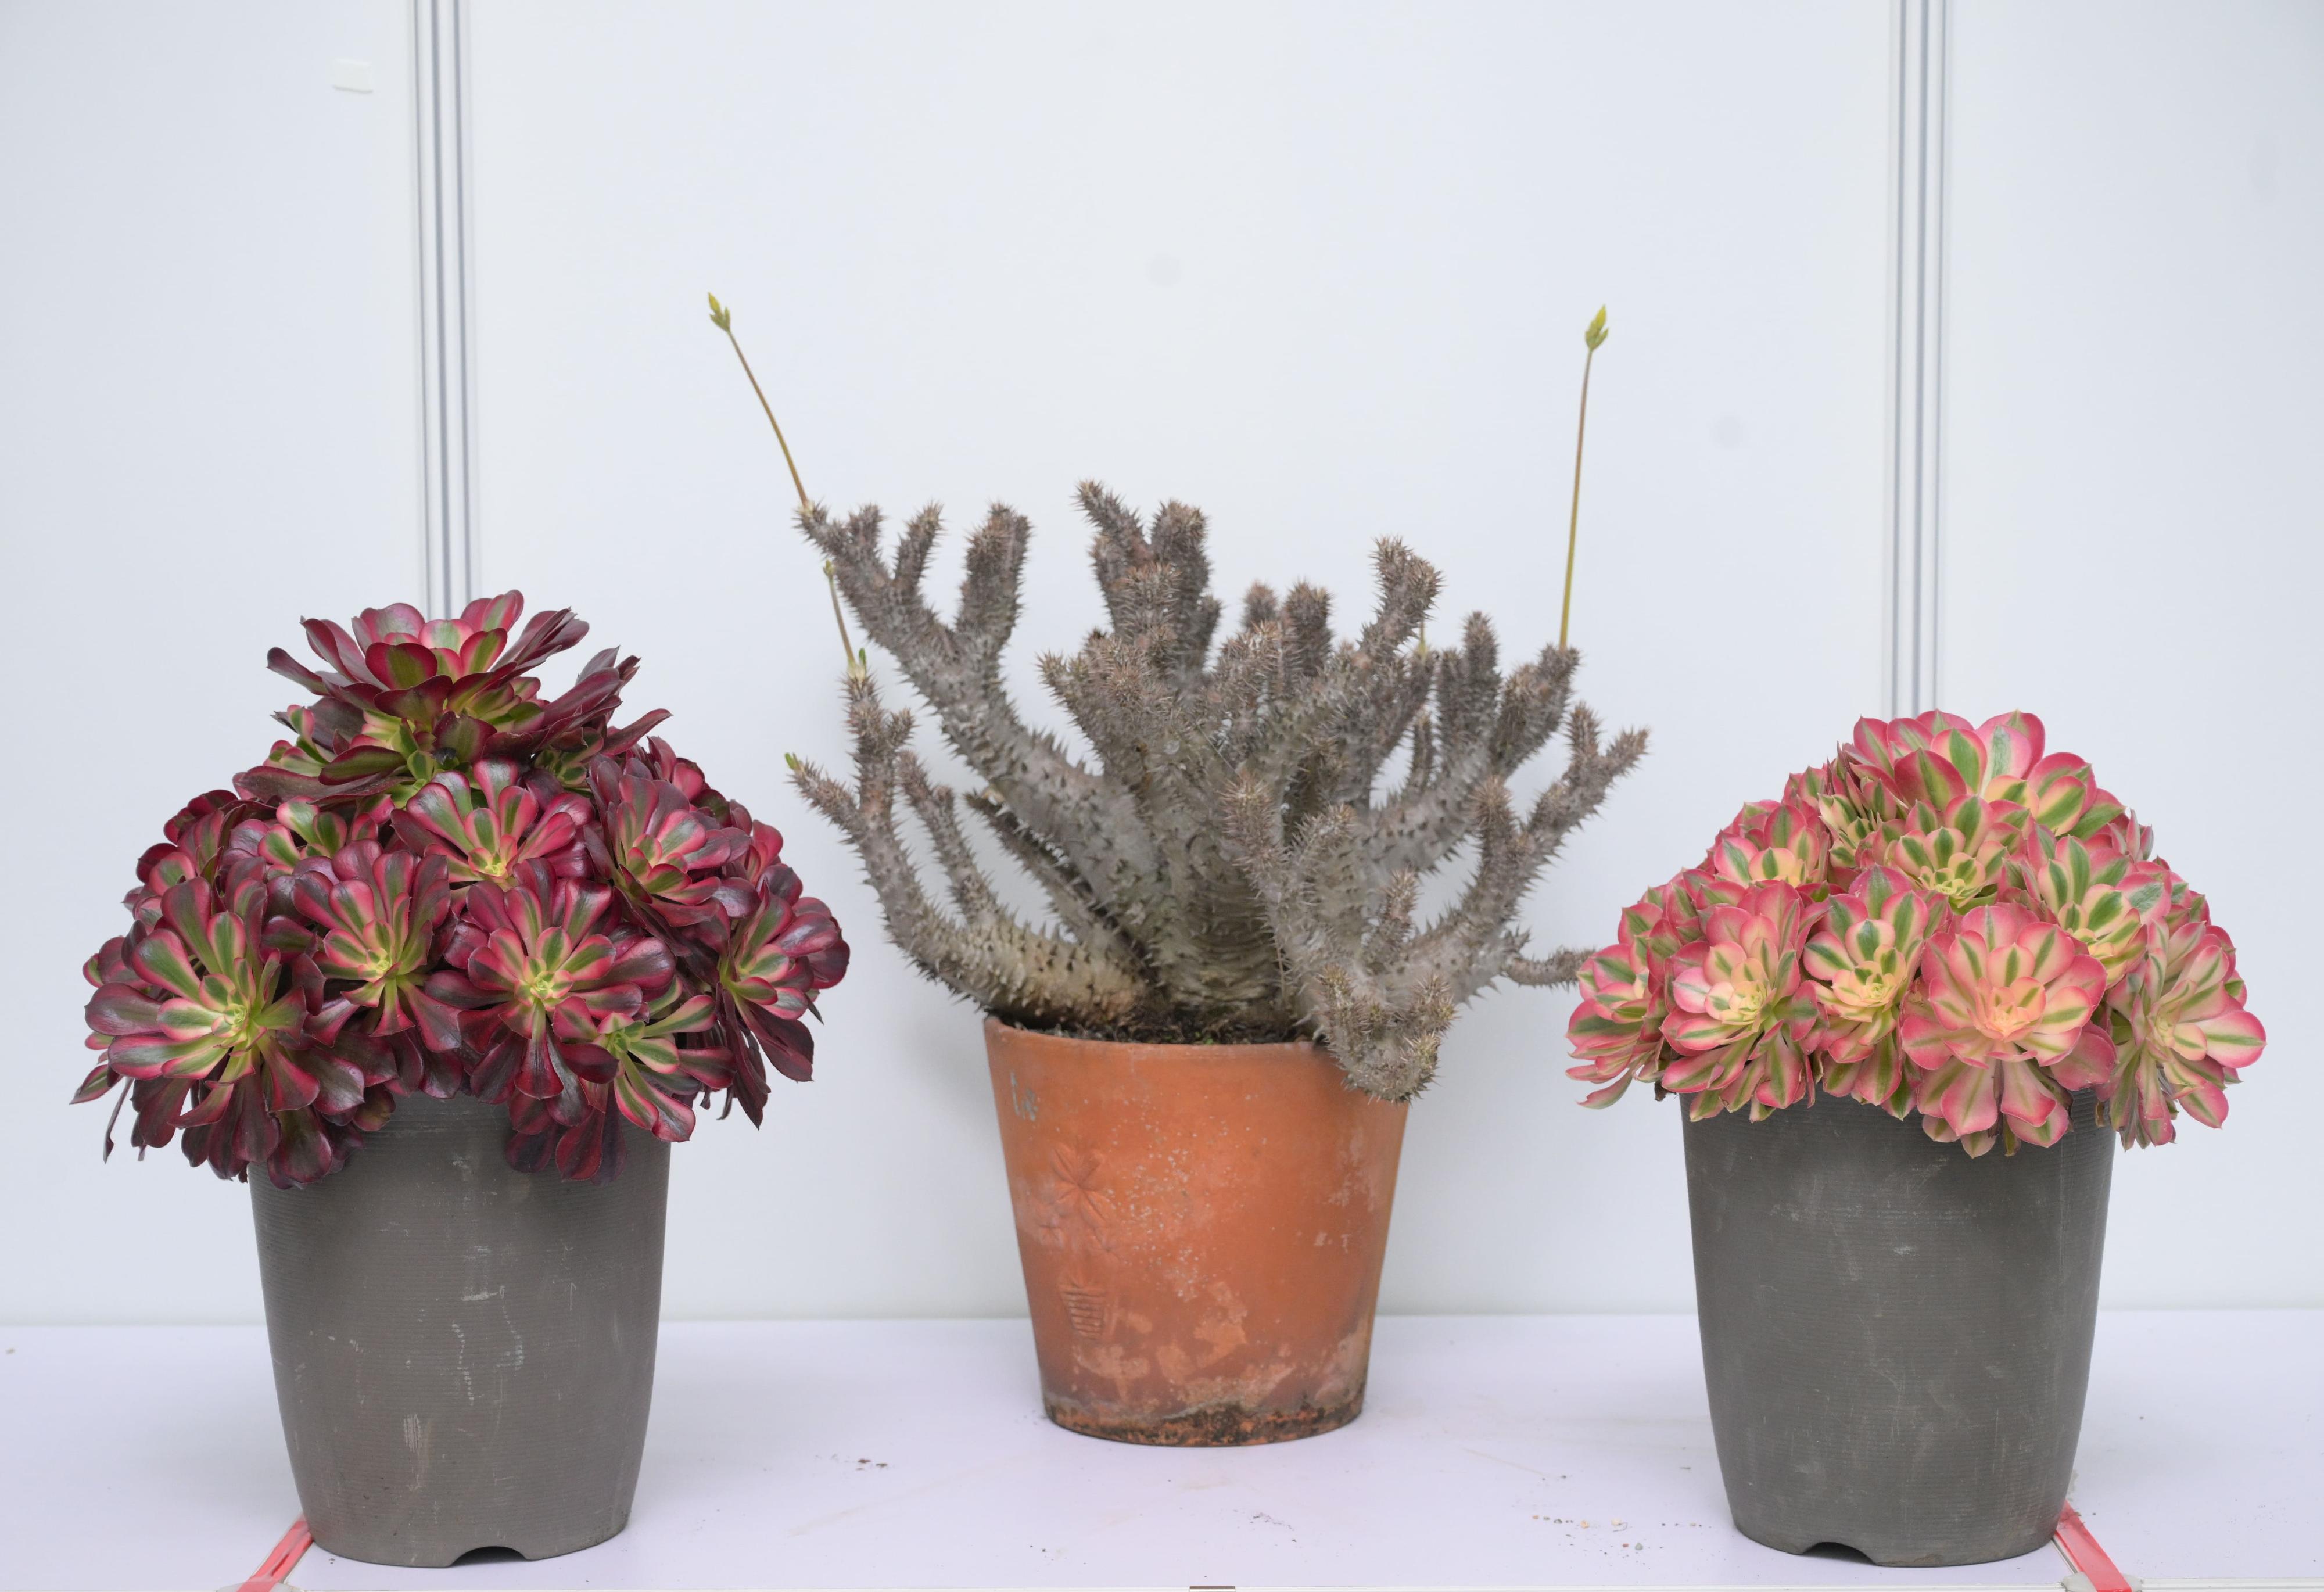 The winners of the plant exhibit competition, one of the major activities of the Hong Kong Flower Show, were announced today (March 16). Photo shows the best exhibit in the School Section, three pots of outstanding succulent plants.